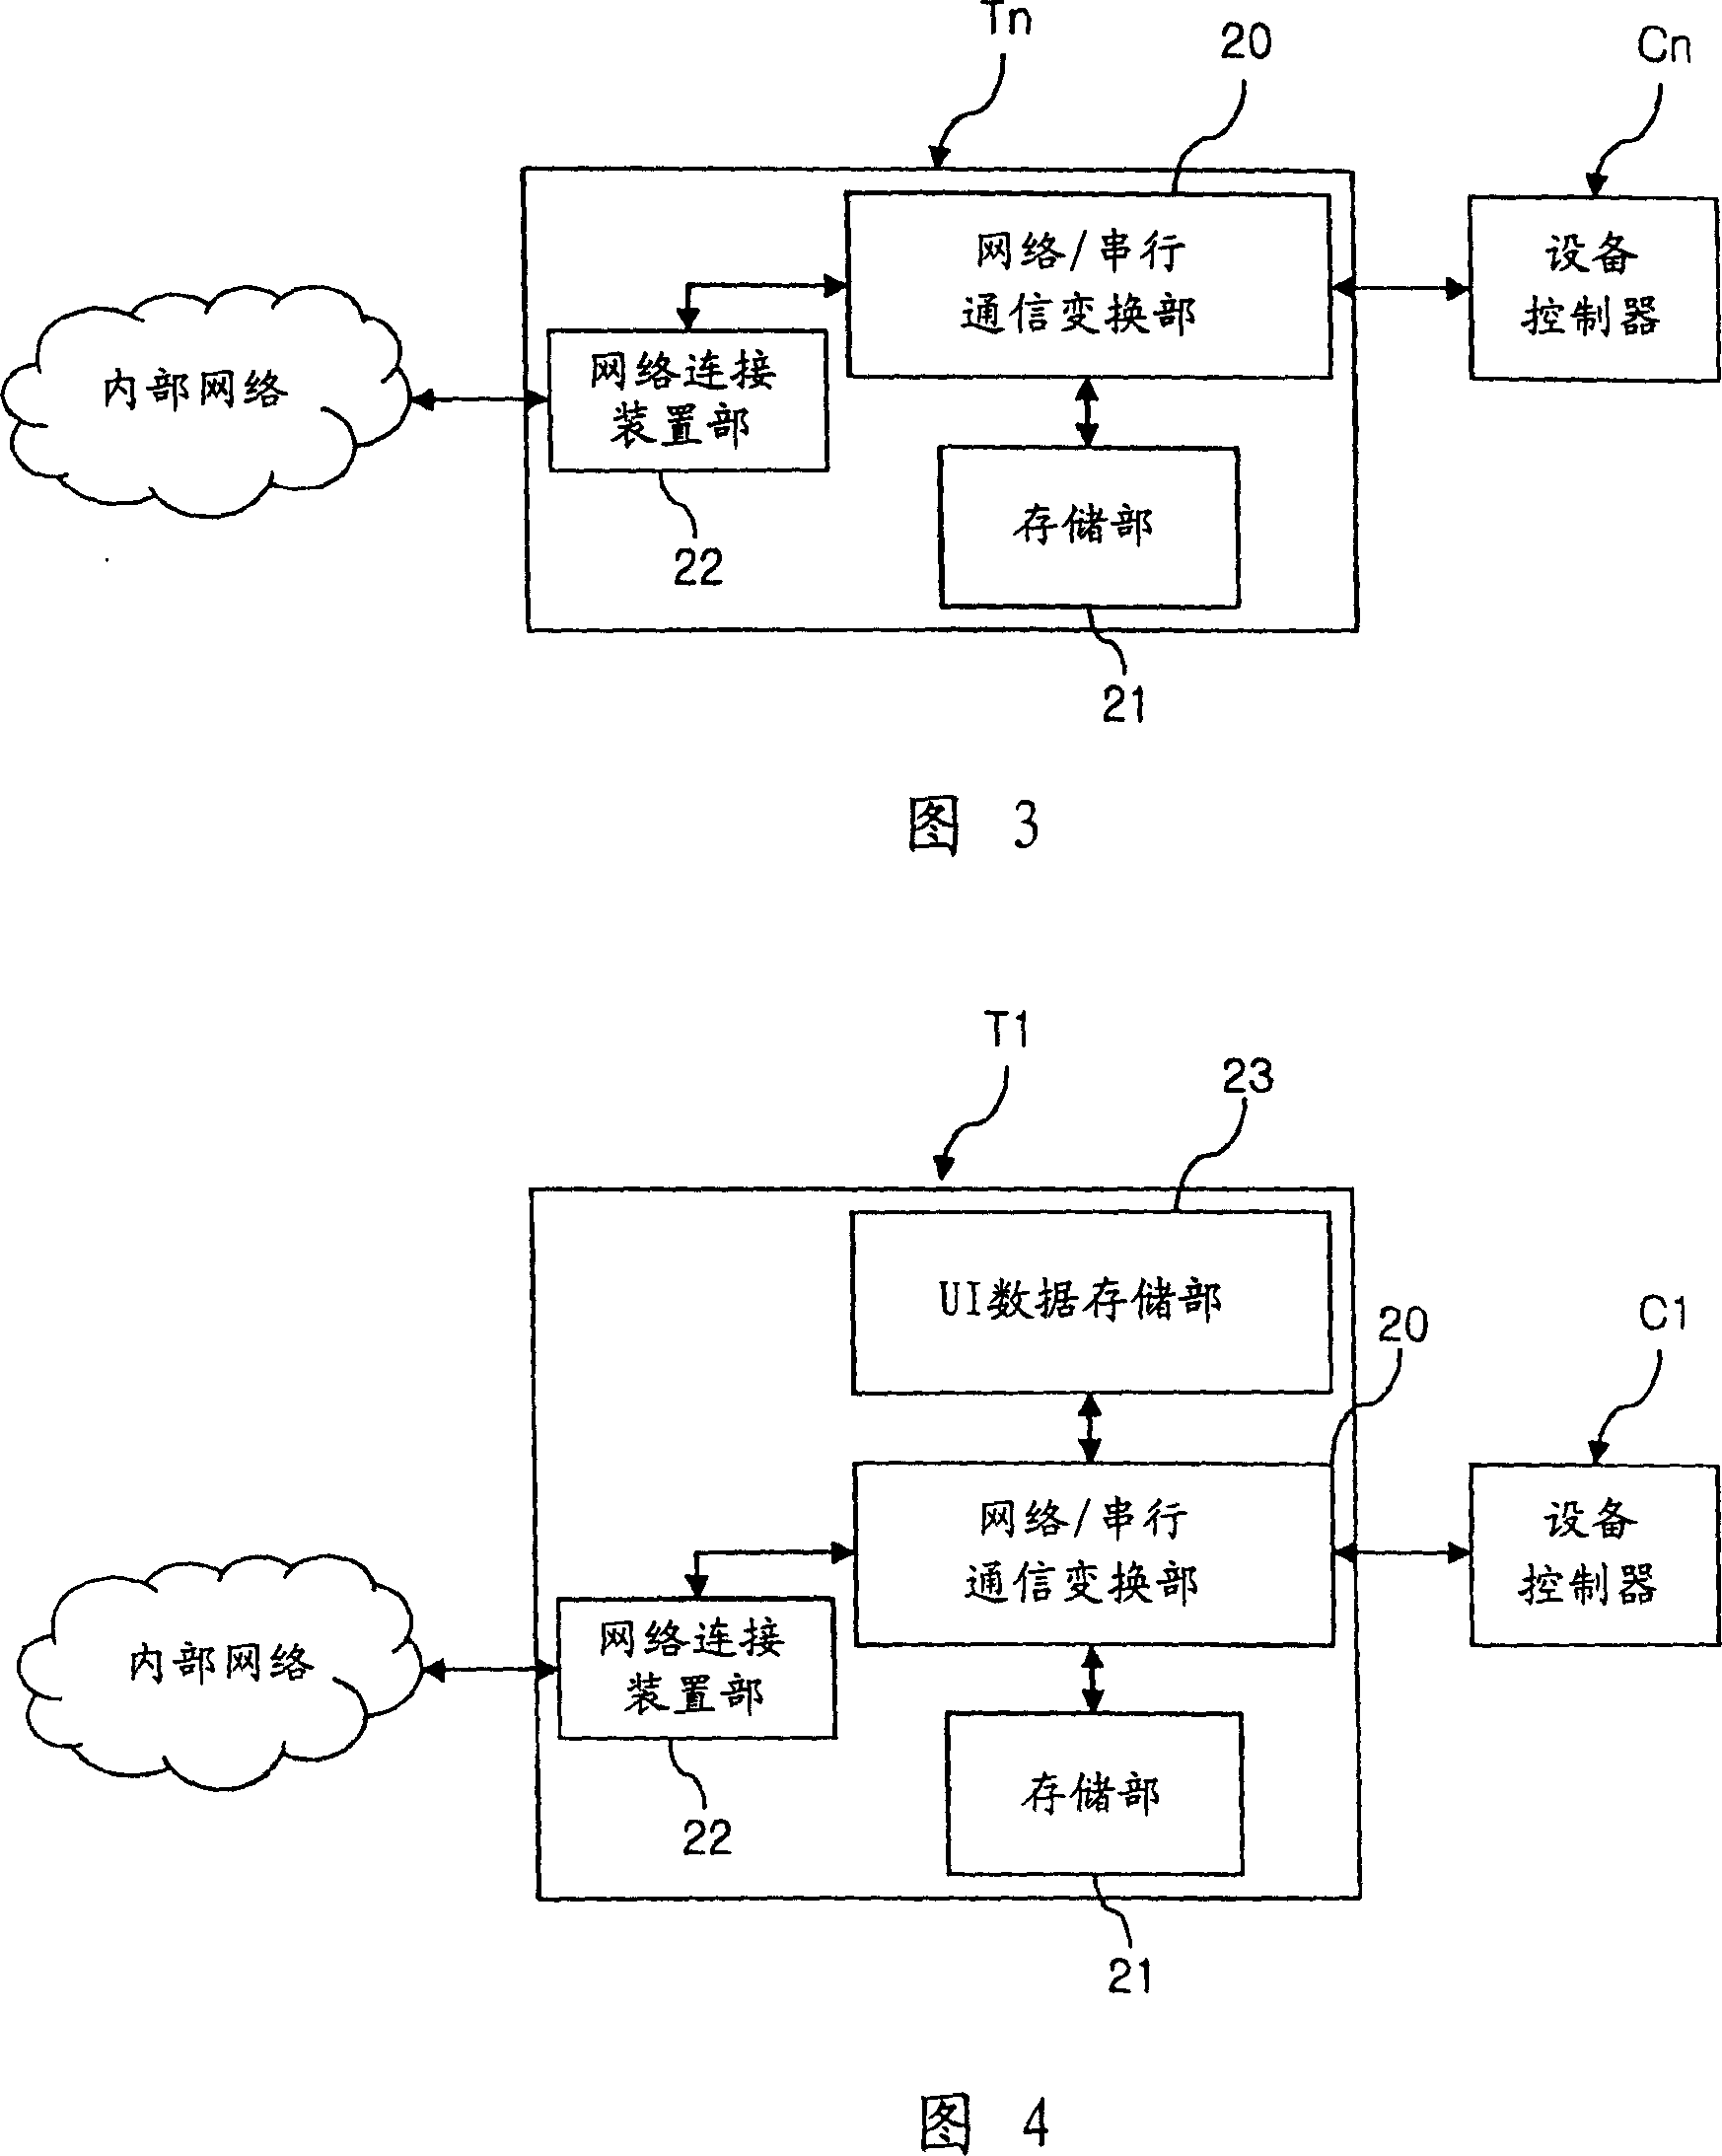 Domestic electrical equipment network system and its control method